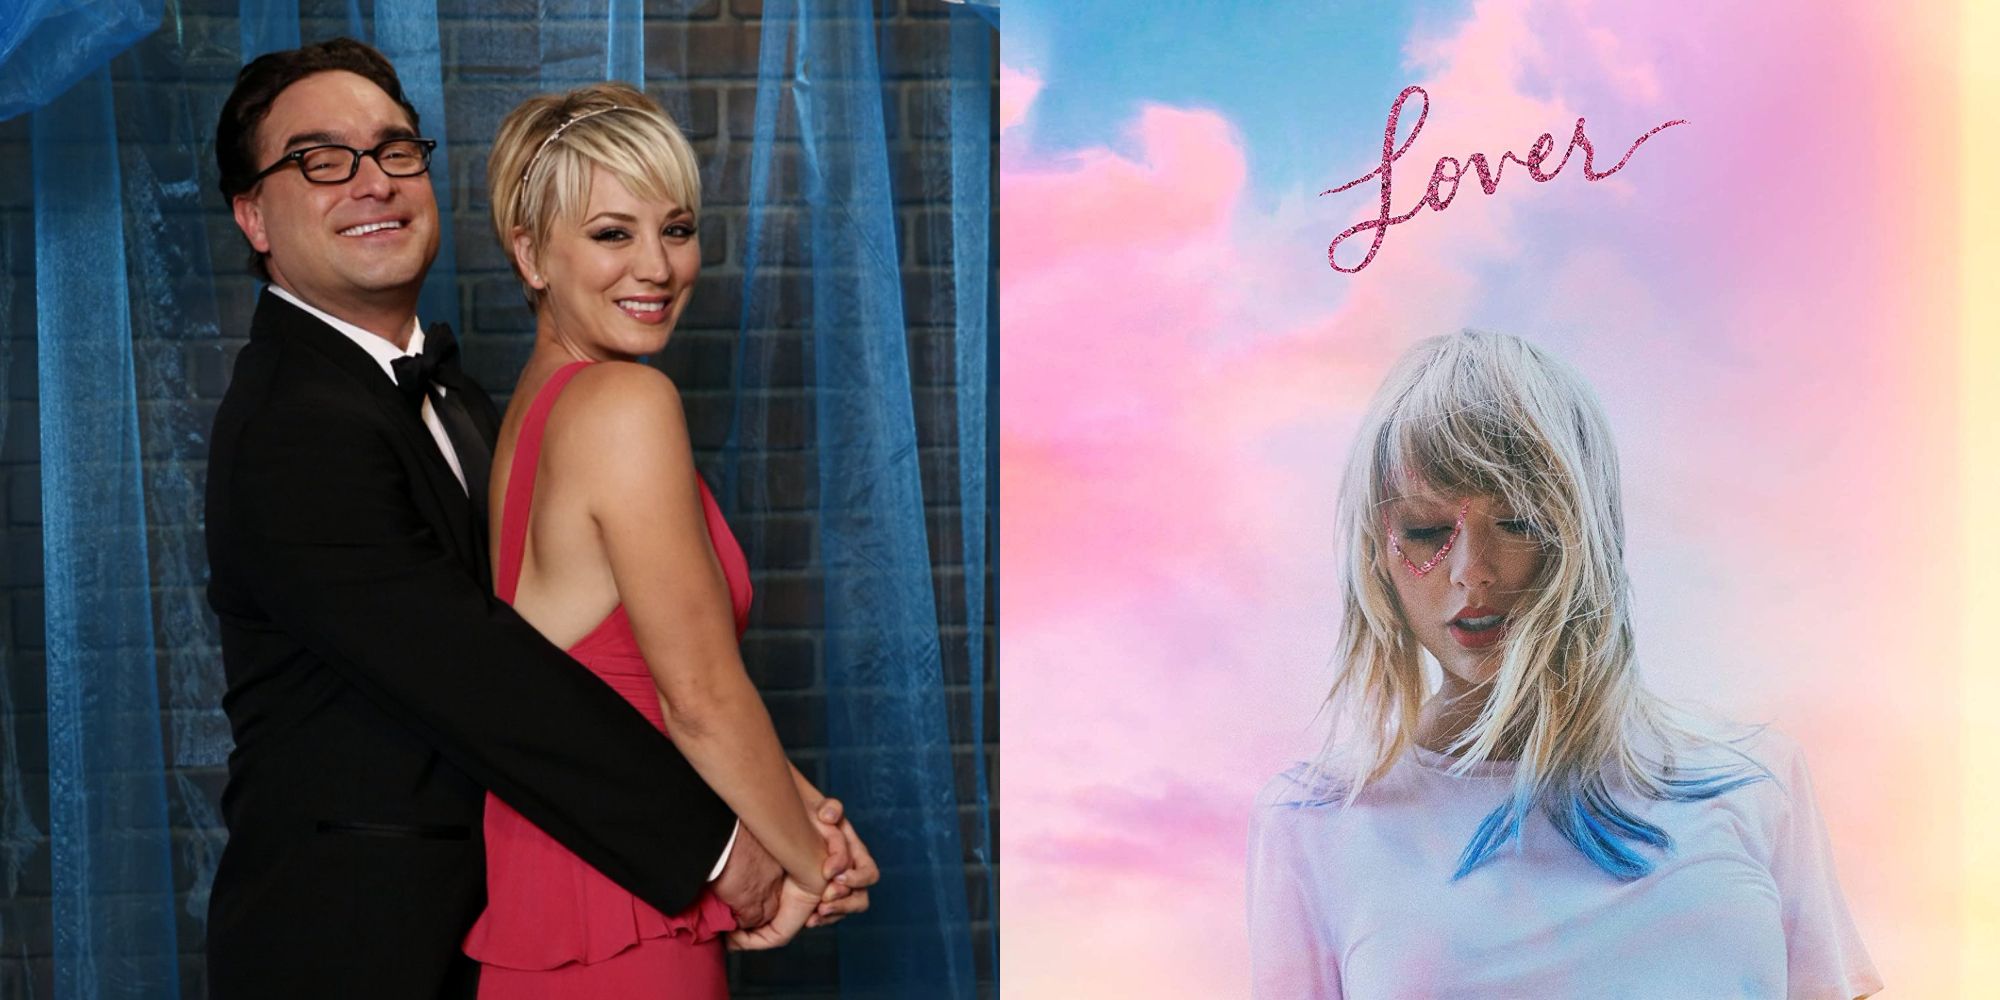 Split image showing Leonard and Penny in TBBT and the cover of Taylor Swift's Lover album.